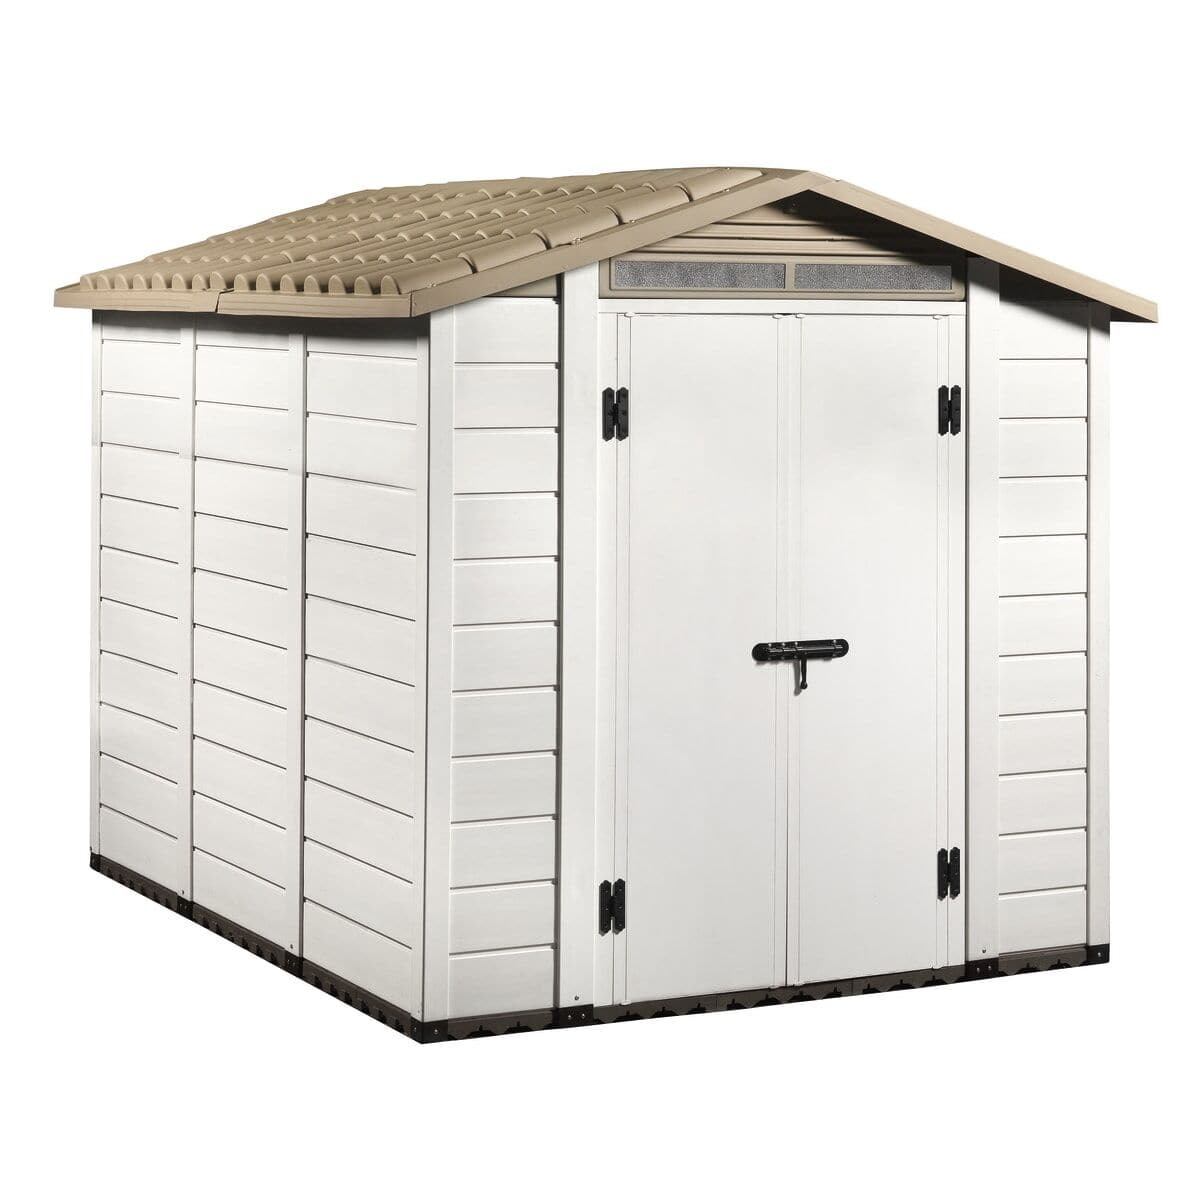 GARDEN SHED TUSCANY EVO 240 THICKNESS 20MM EXTERNAL DIMENSIONS 242.5X202.5 FLOOR INCLUDED